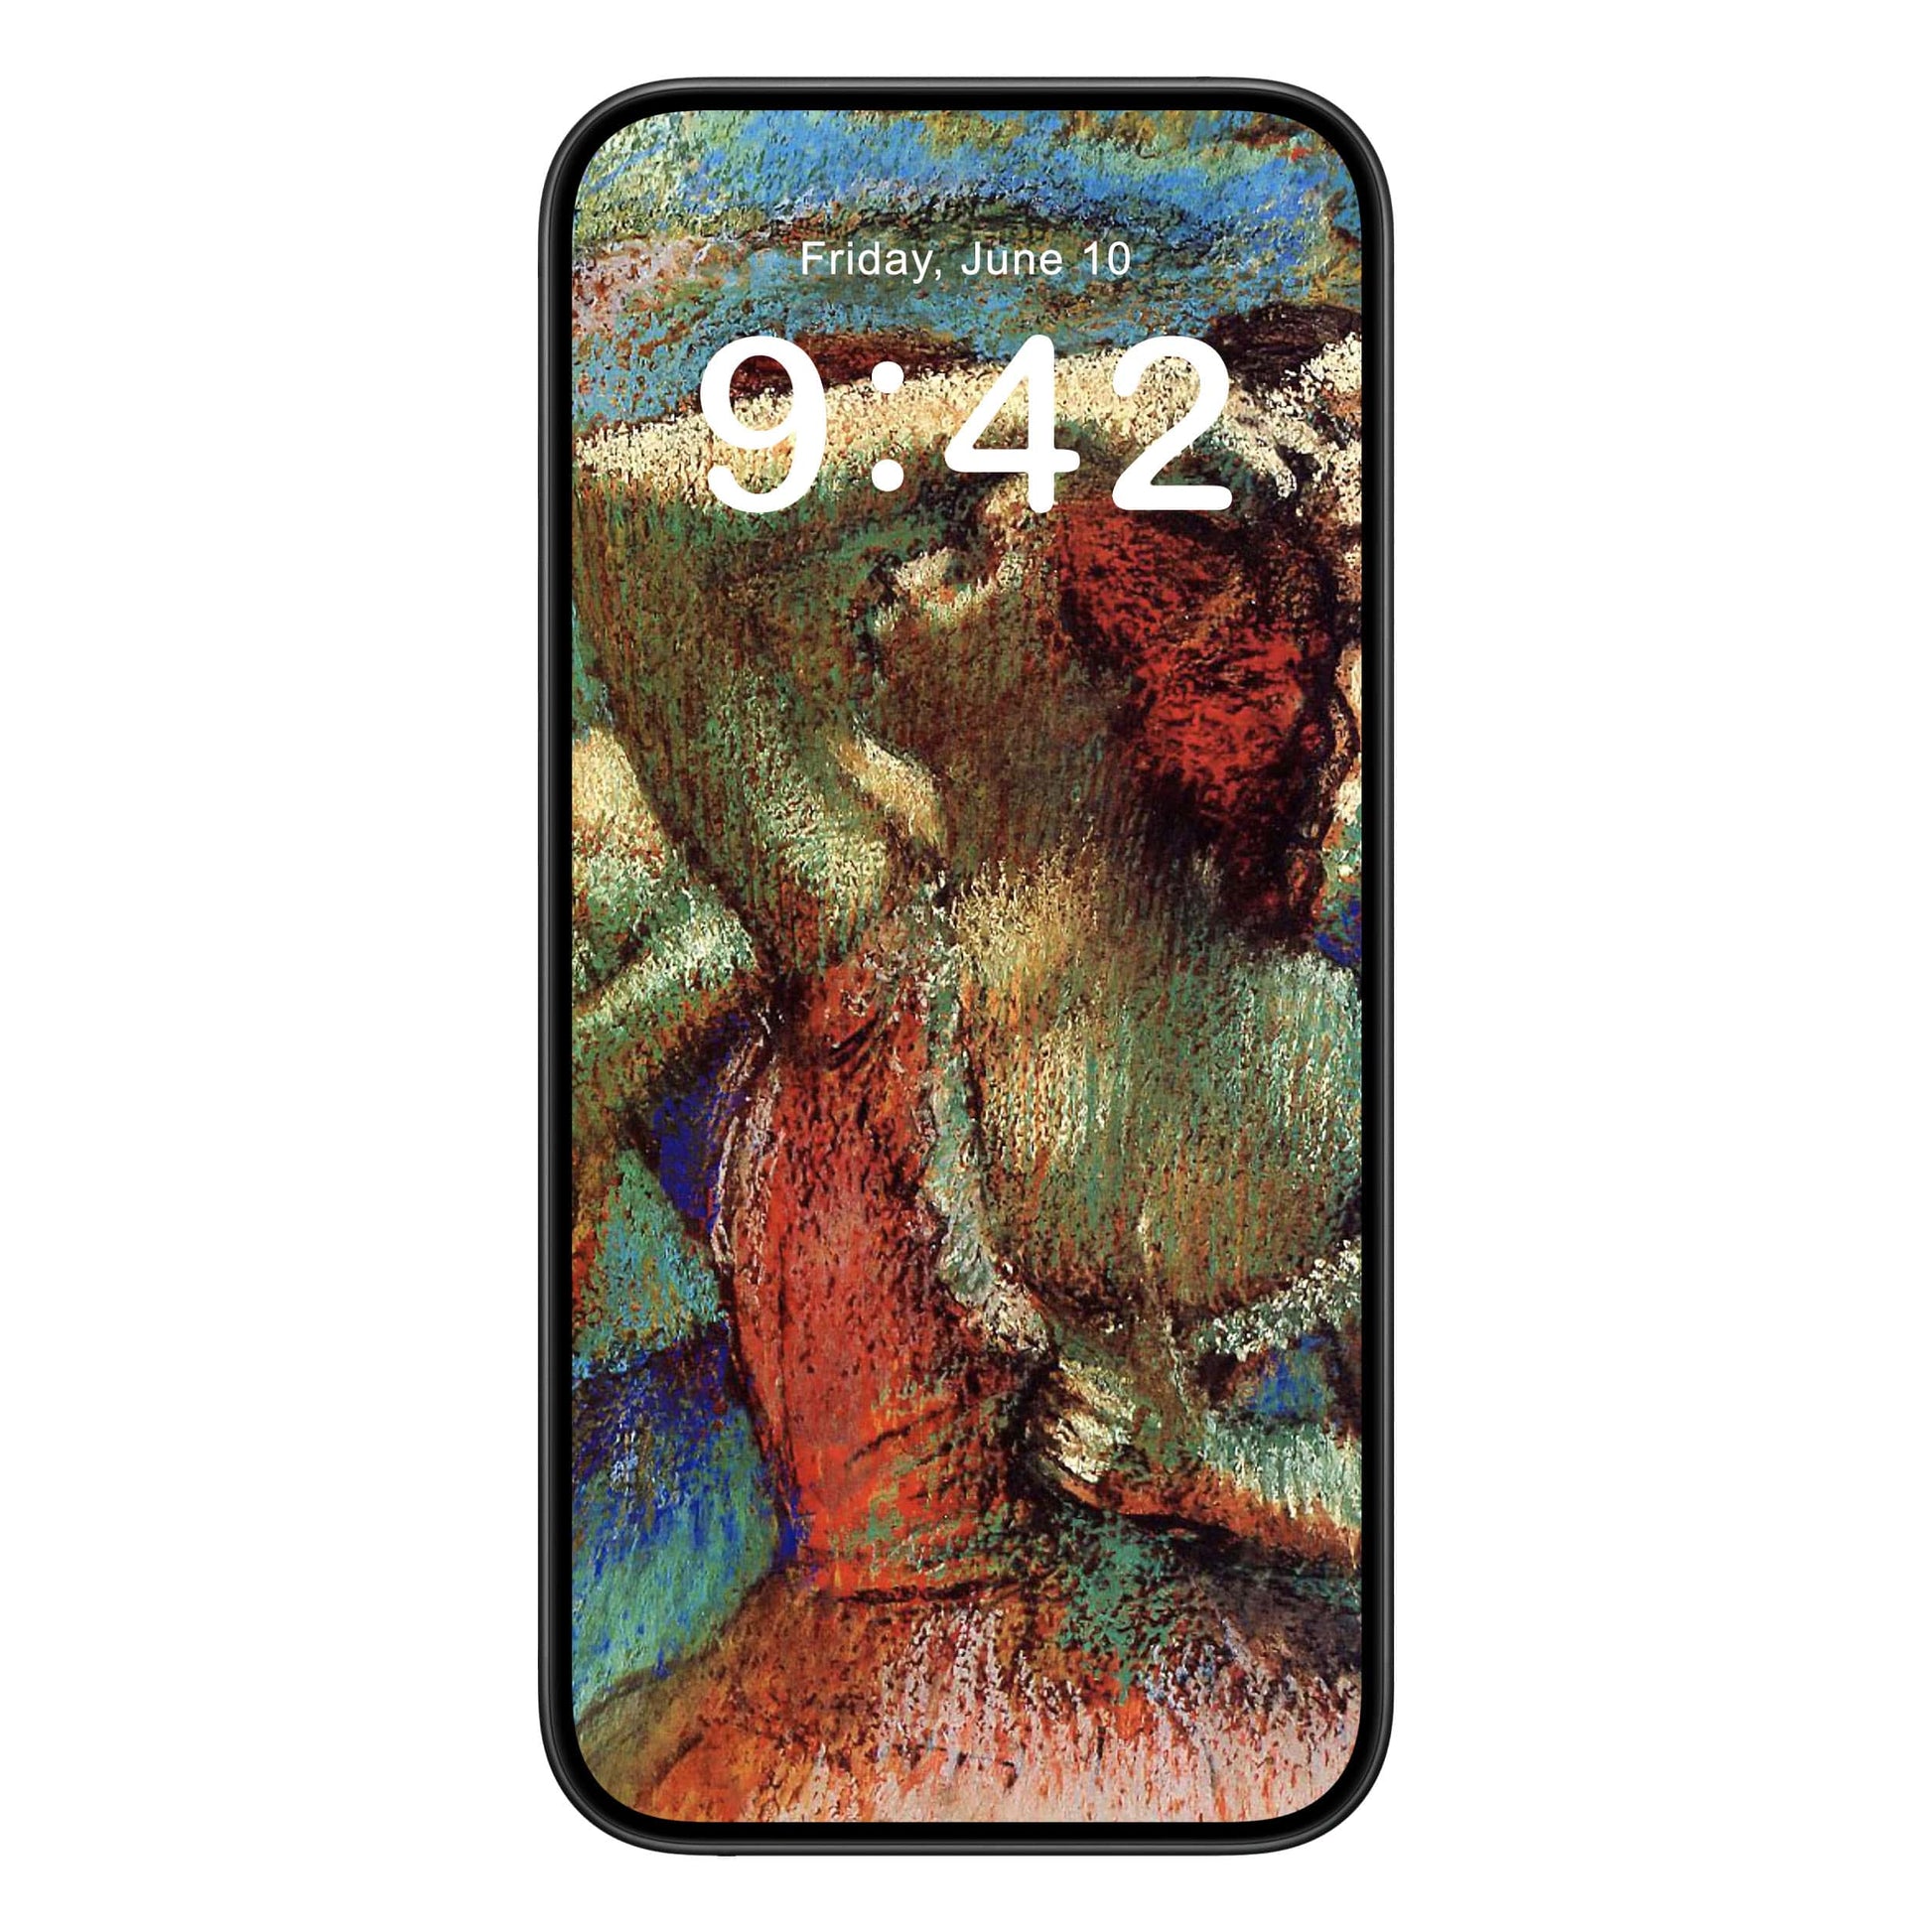 Impressionist phone wallpaper background with degas dancers design shown on a phone lock screen, instant download available.